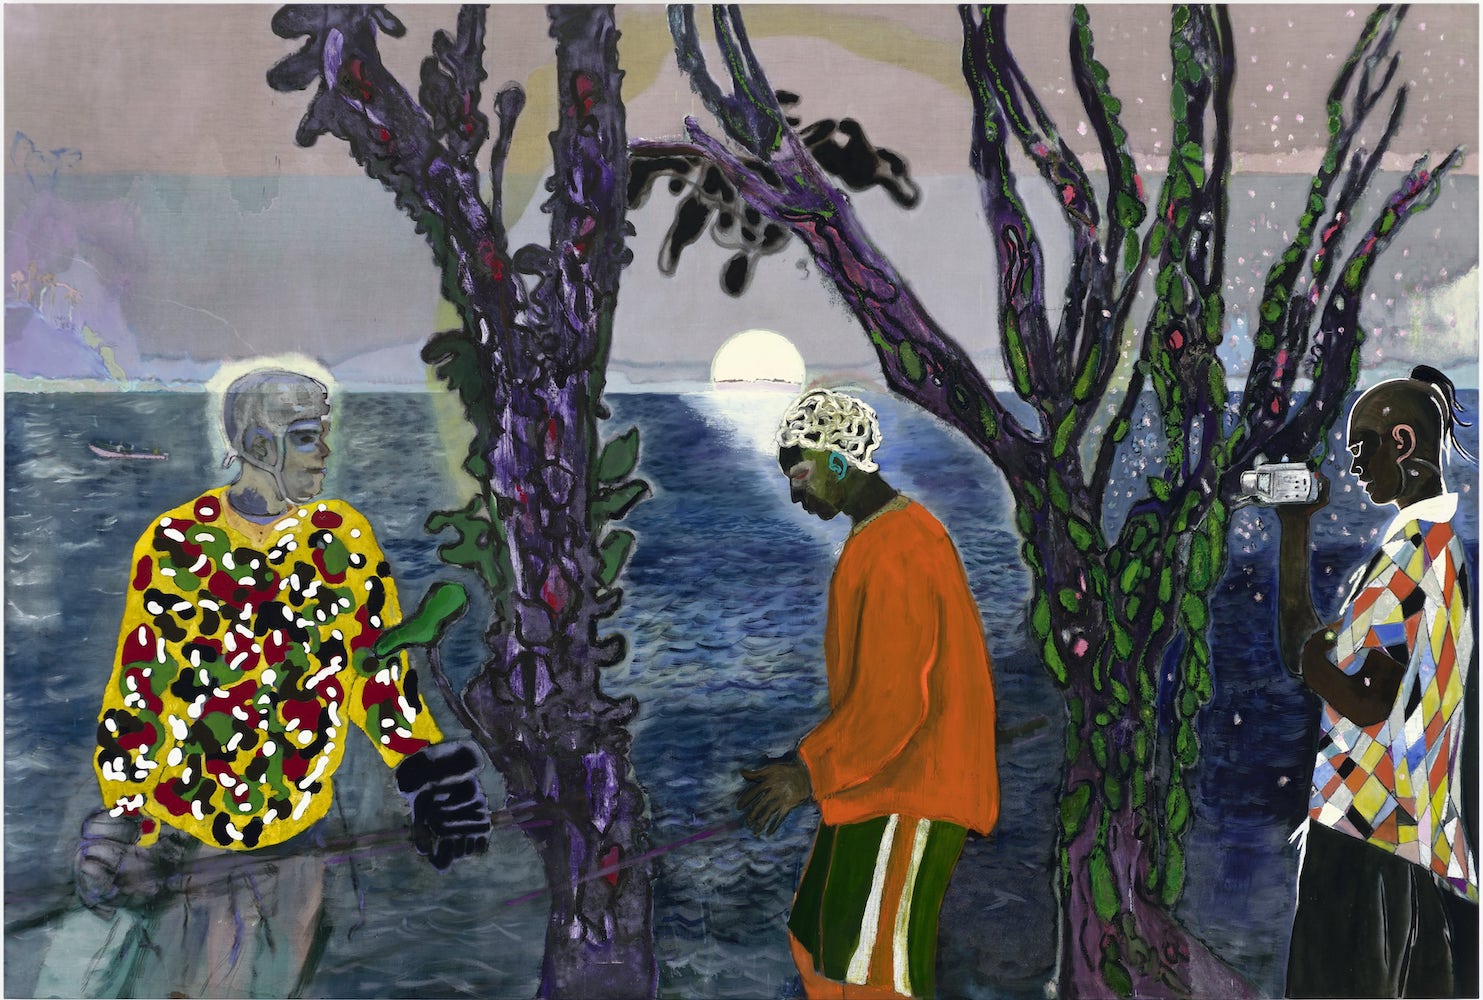 Peter Doig at Musée d'Orsay